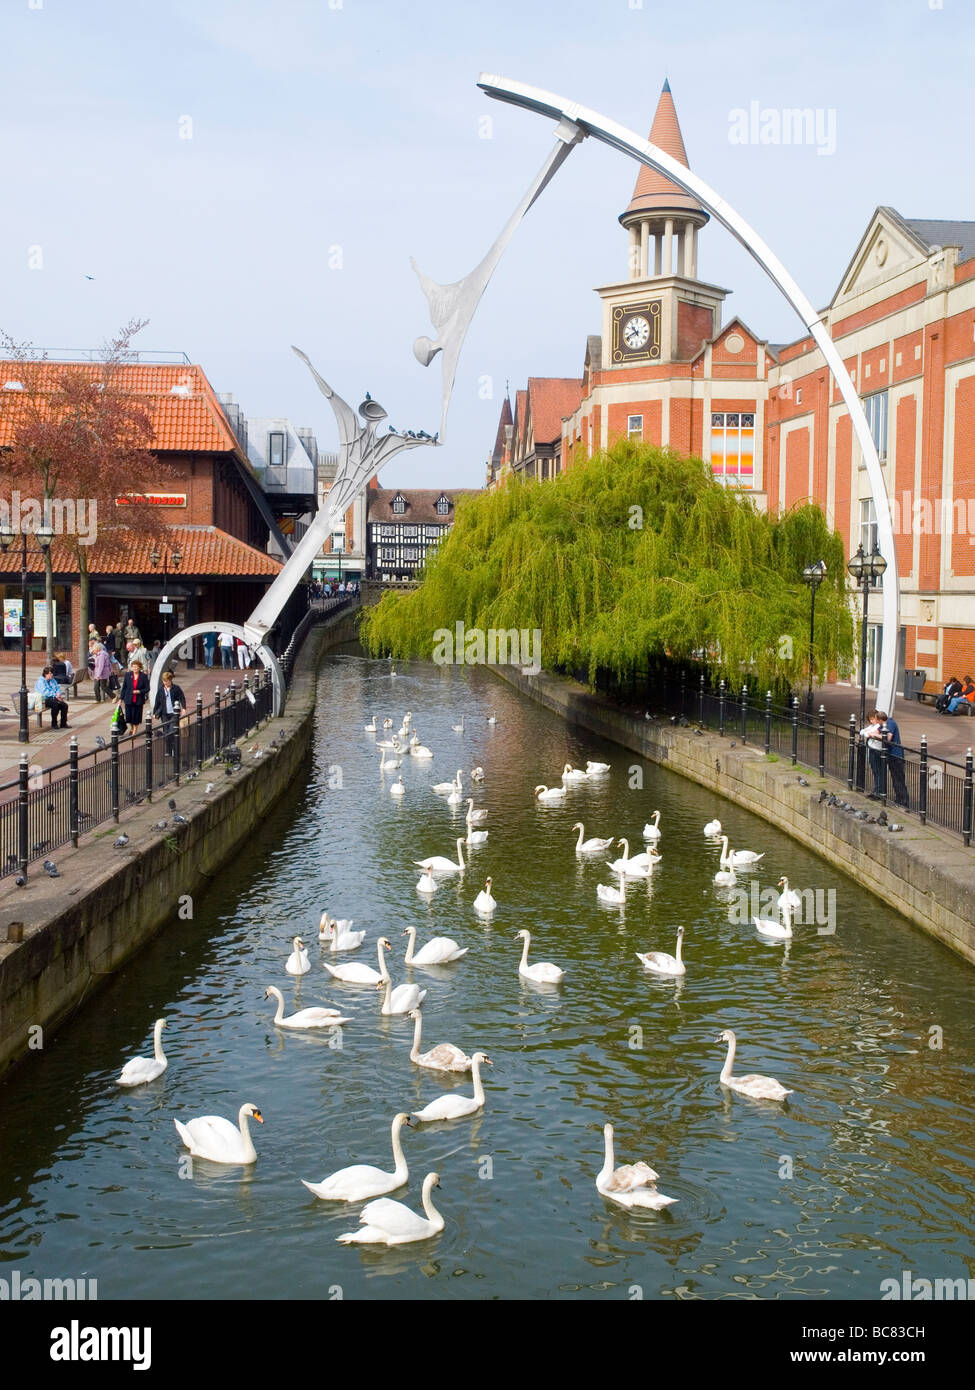 The Waterside Shopping Centre, located on the River Witham in Lincoln City Centre, Lincolnshire England UK Stock Photo